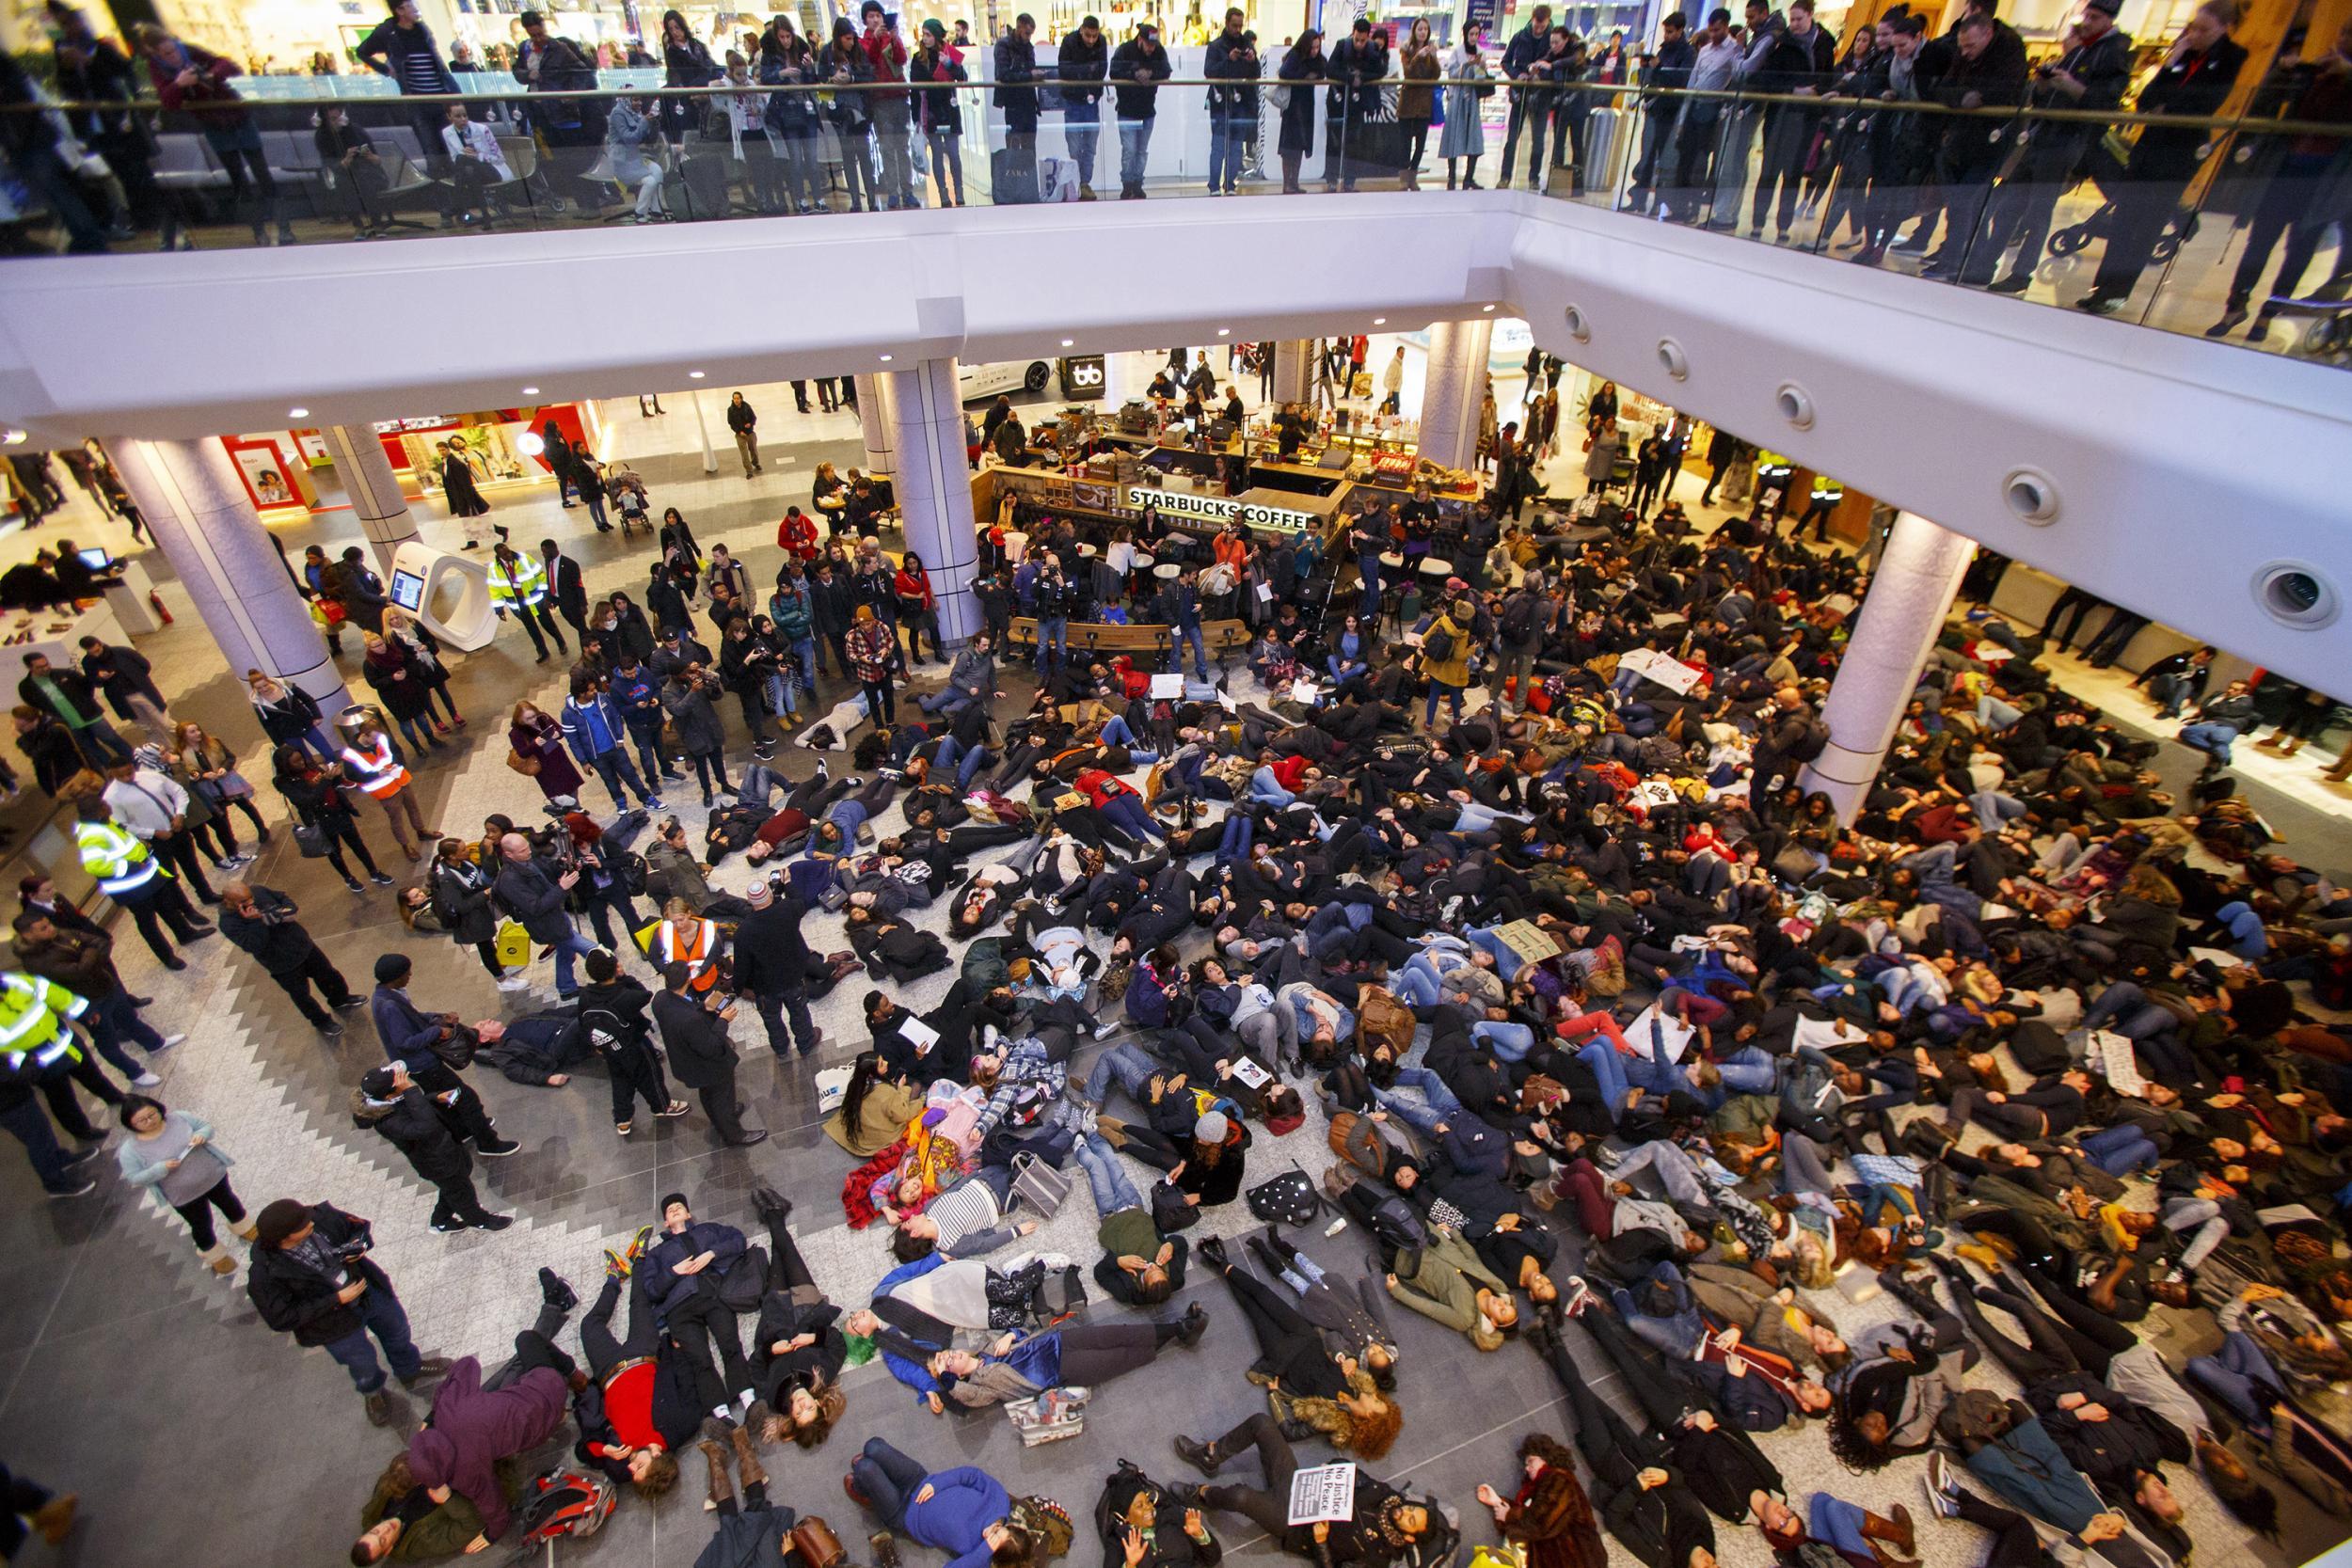 Police arrested 76 people during "die-in" protest in Westfield shopping centre in 2014.